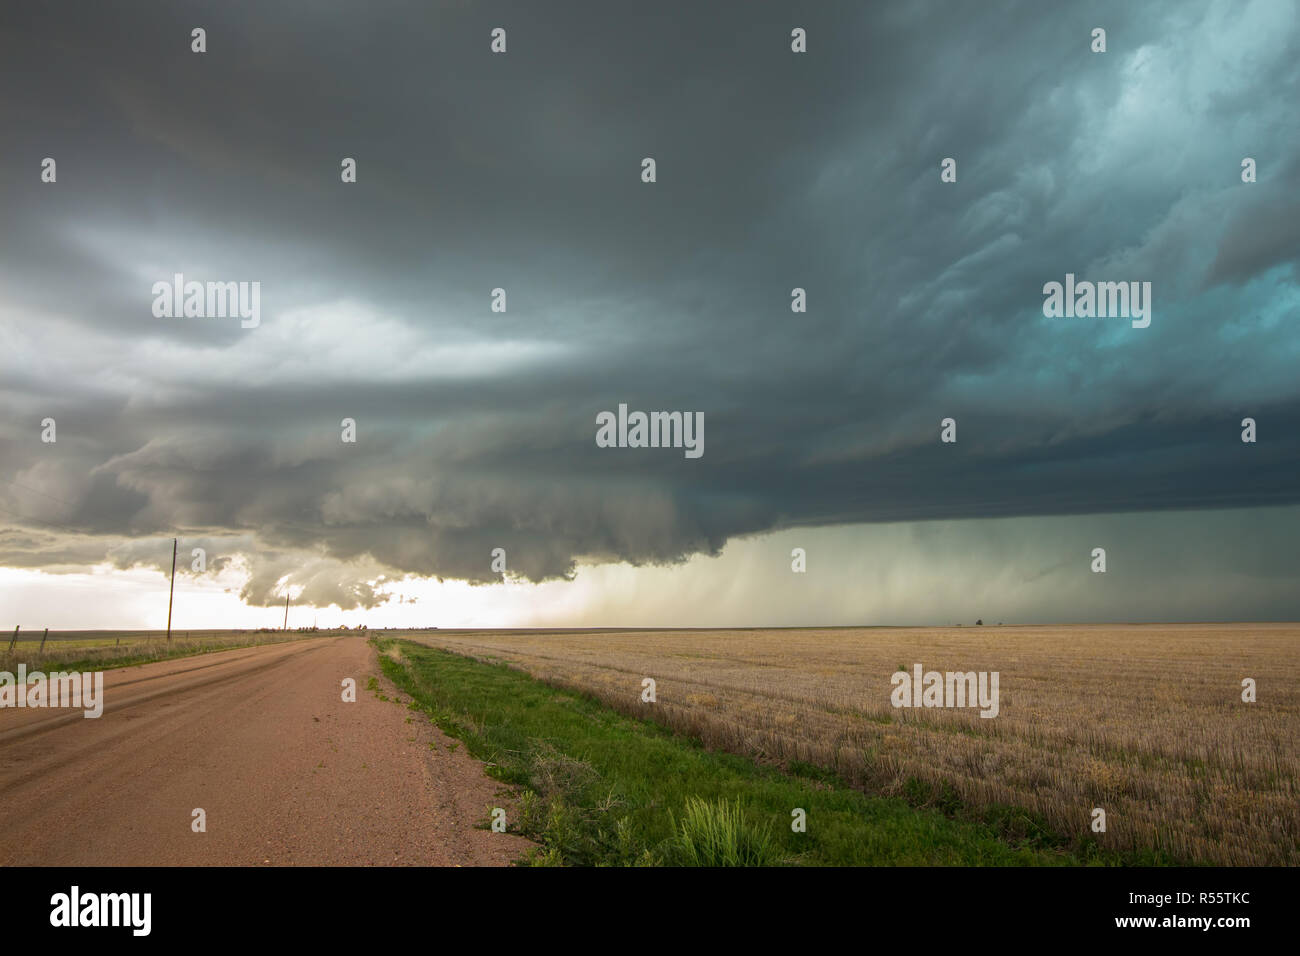 A wall cloud forms underneath a tornadic supercell thunderstorm as it gathers strength. Stock Photo